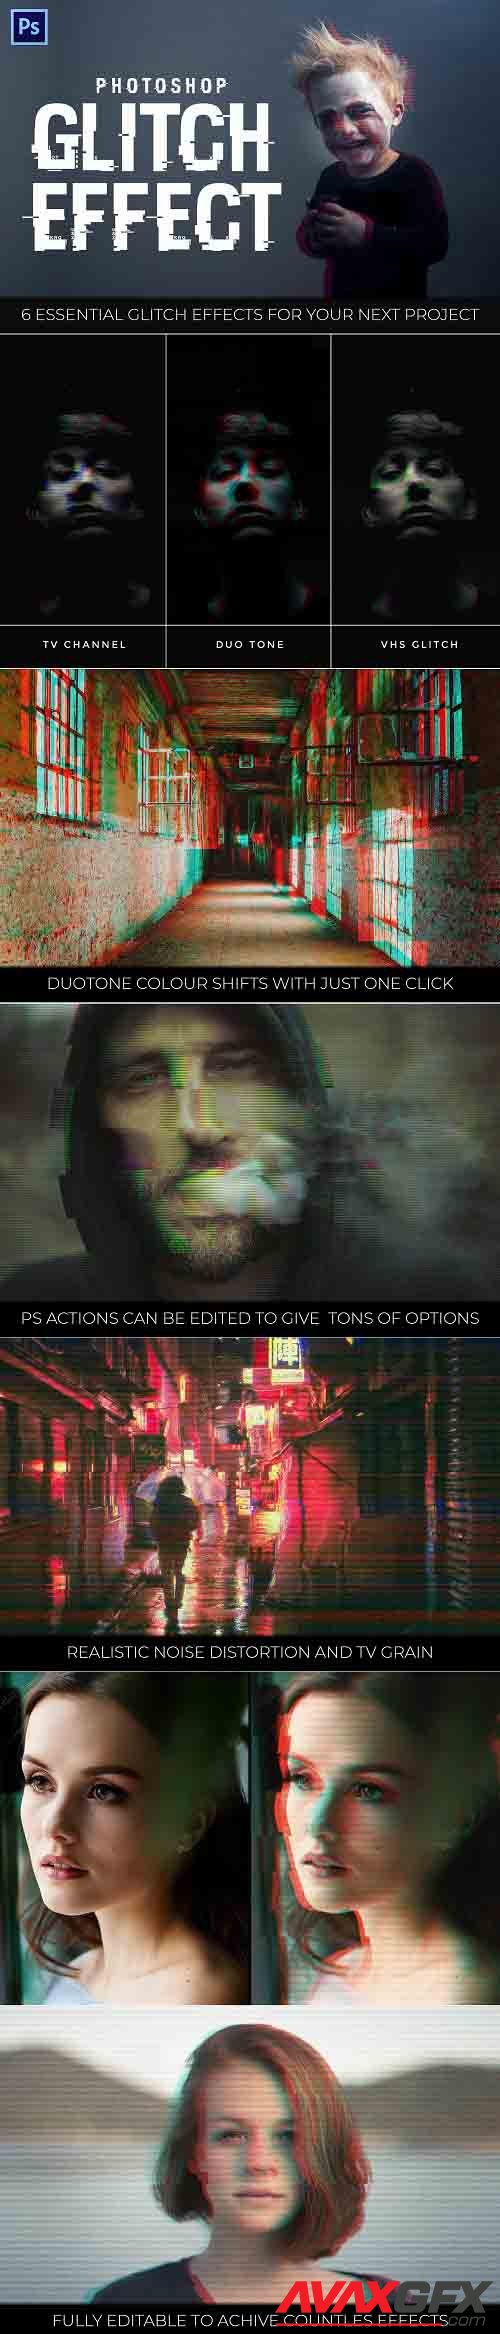 Glitch Effect Photoshop Actions - 4392799